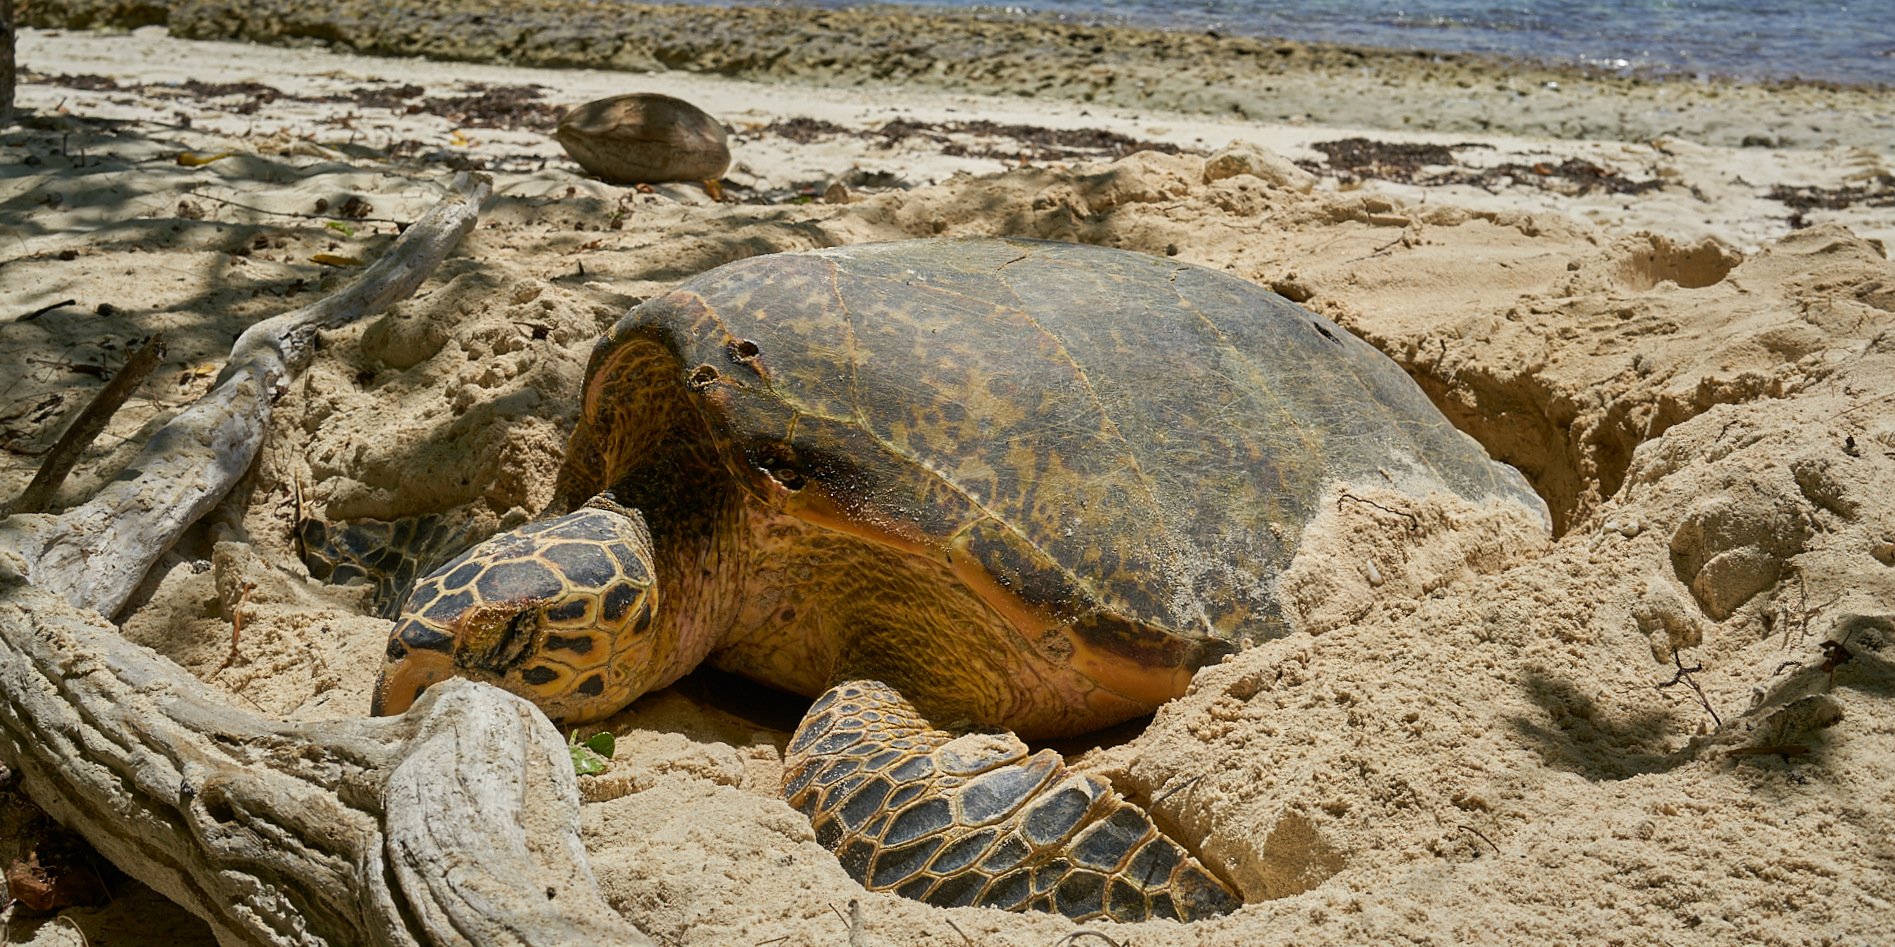 A Aldabra giant tortoise nests on a beach on Curieuse Island in Seychelles. Working to preserve these endangered turtles is one of the top volunteer abroad programs.